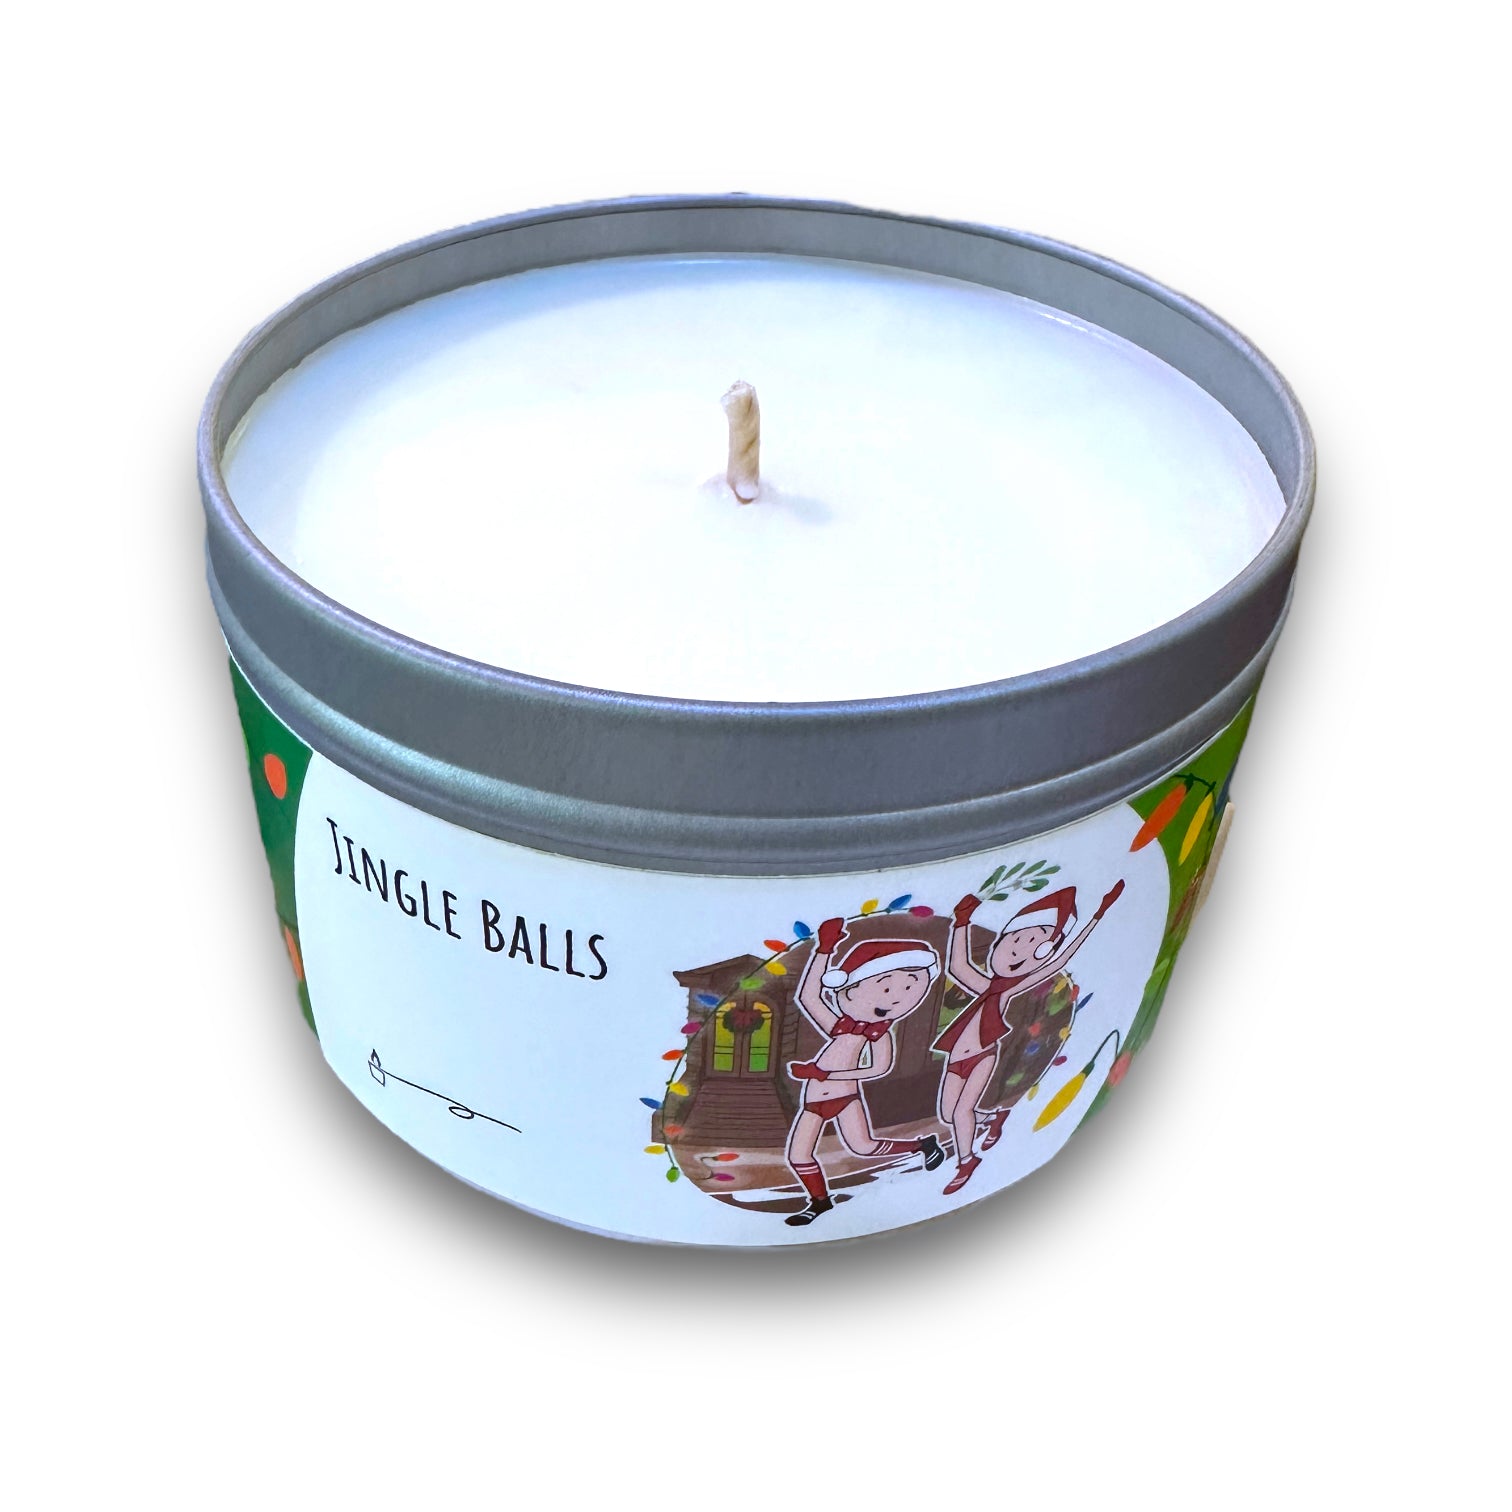 Jingle My Balls Holiday Candle - Funny Holly Berry Scented Candle